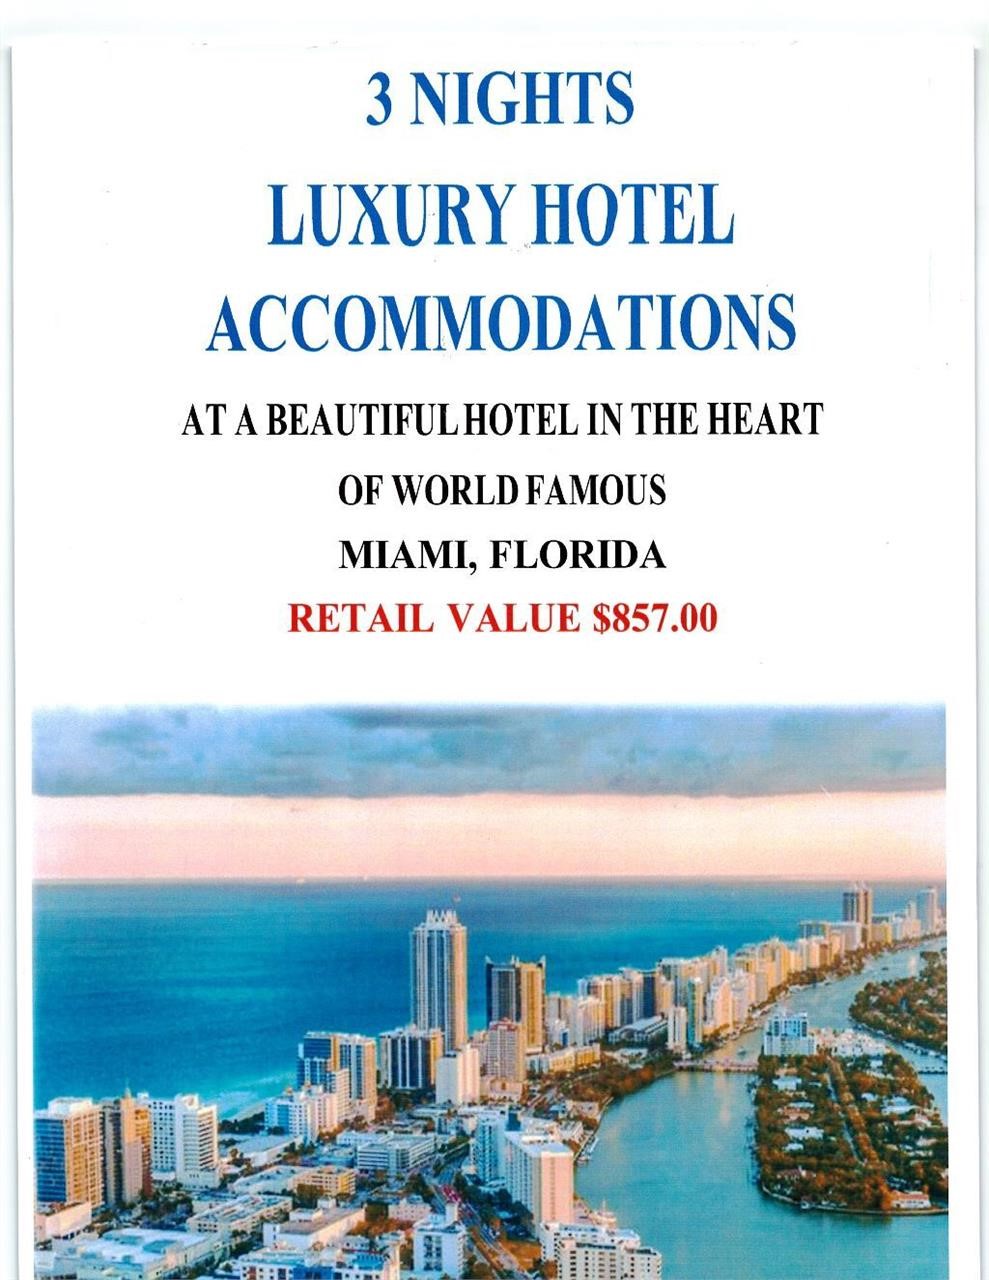 MAY 30TH. Vacation Hotel Accommodation Packages Auction